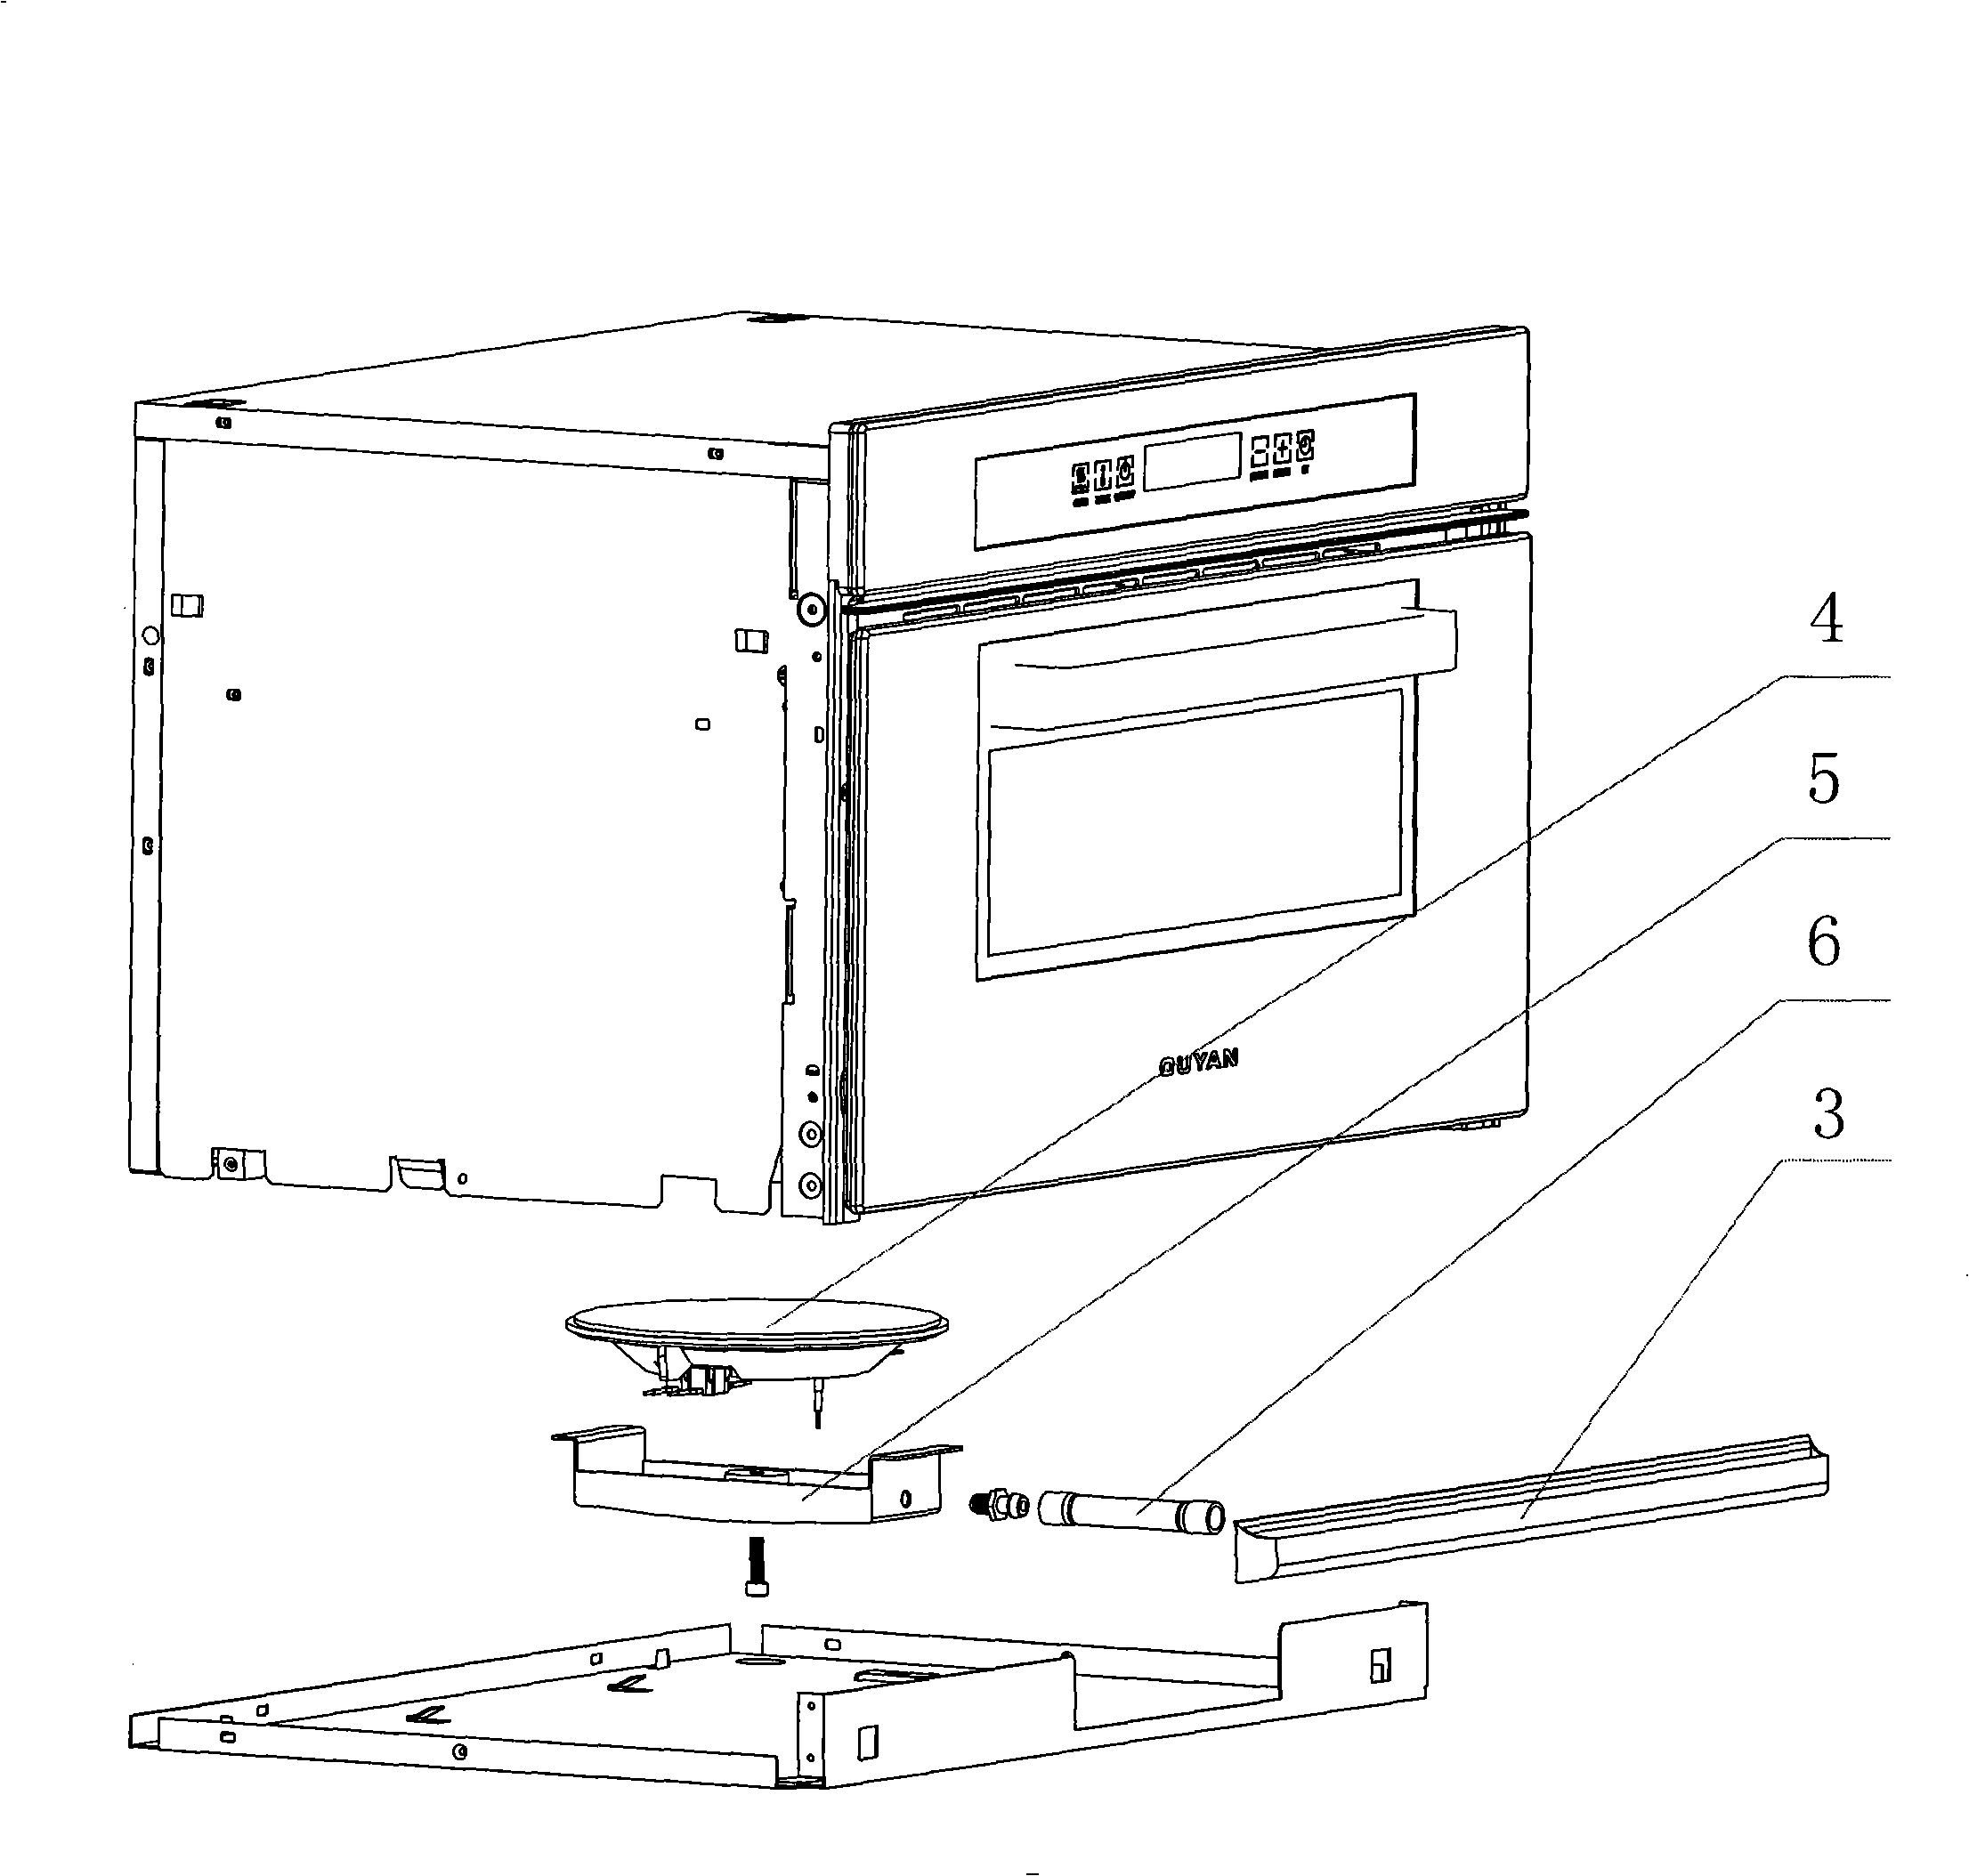 Domestic electric steaming furnace